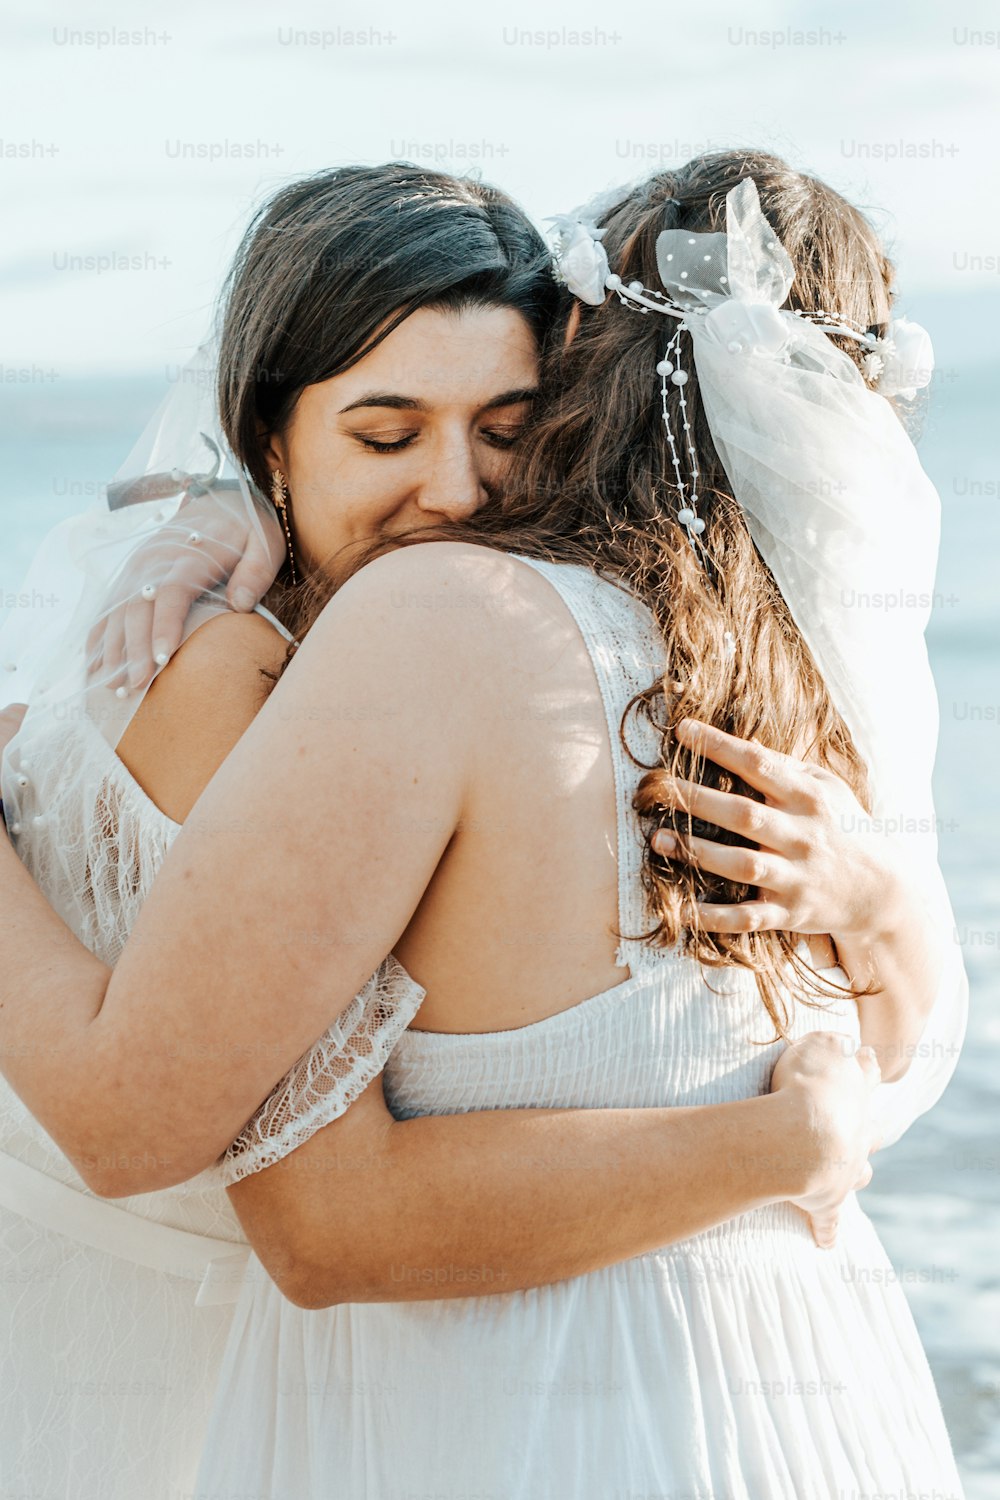 two women hugging each other on the beach